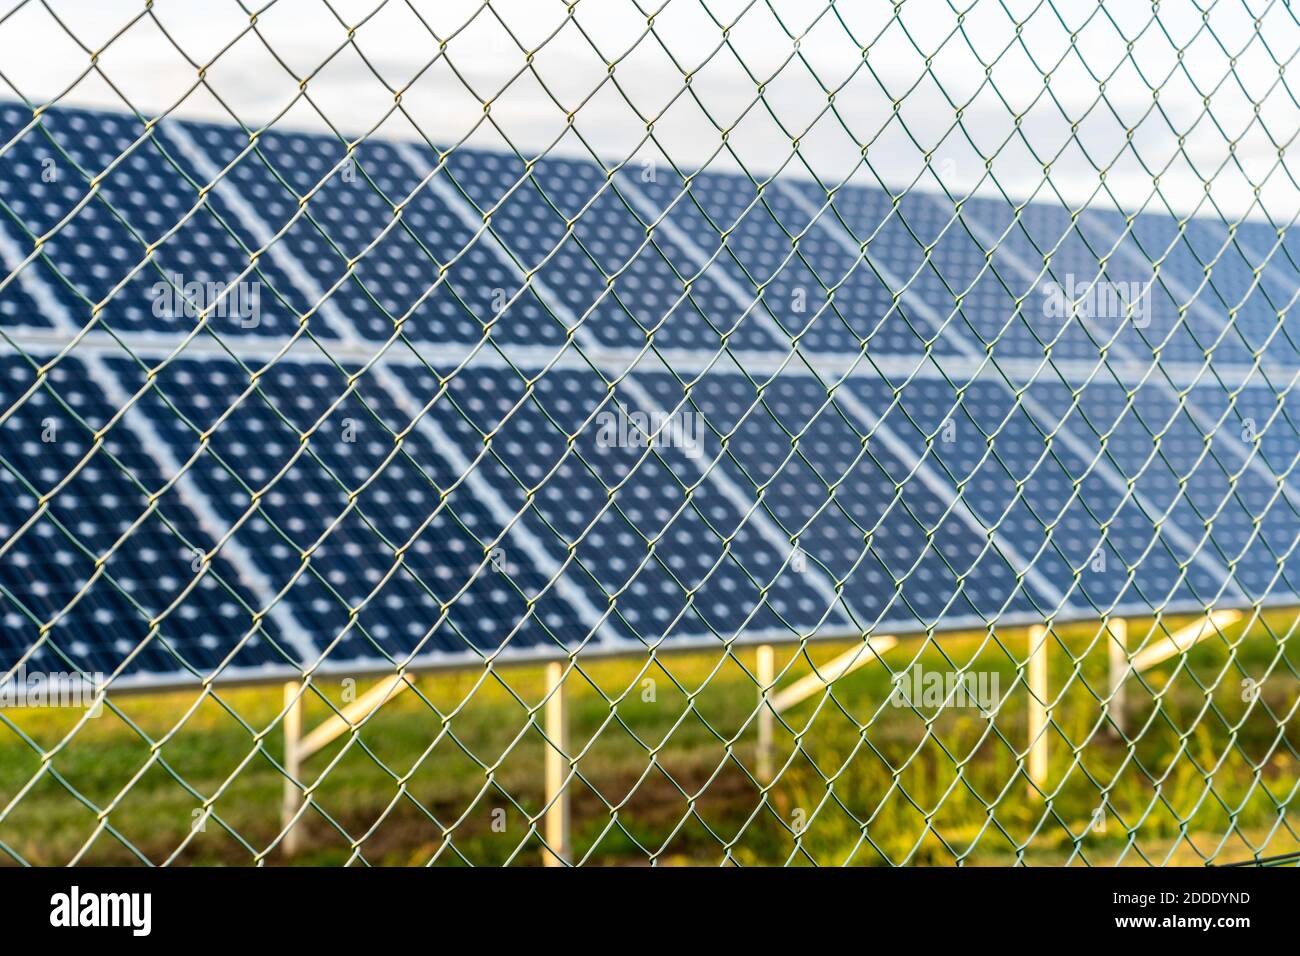 Solar farm with photovoltaic panels behind the fence, alternative electricity source Stock Photo